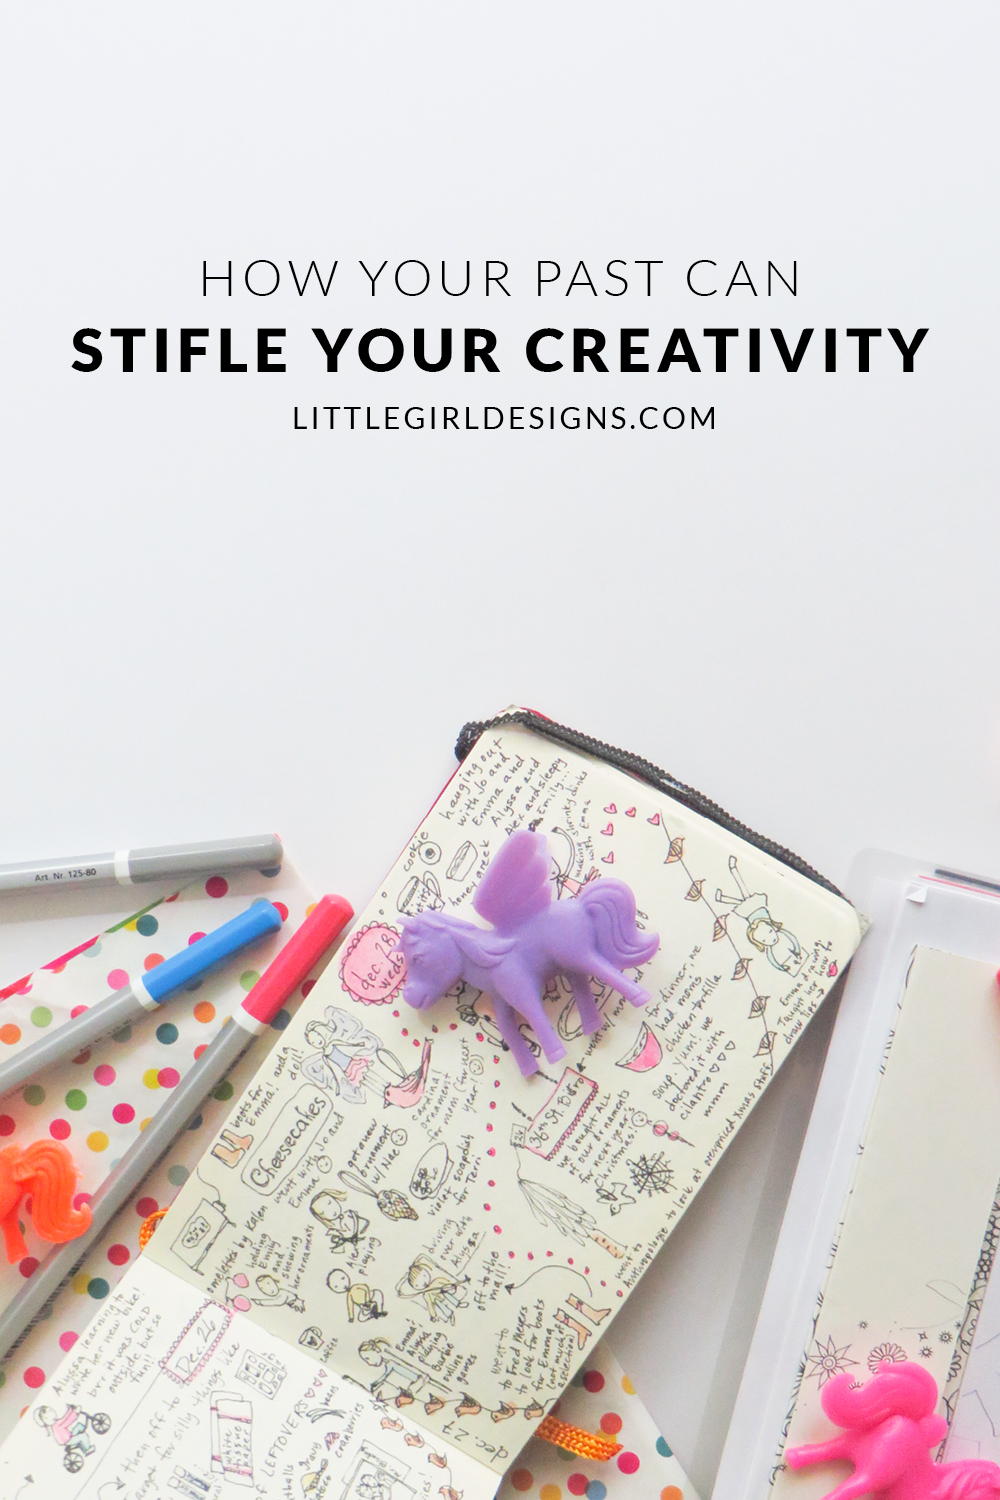 How Your Past Can Stifle Your Creativity - Some of the thought processes and habits we have actually keep us from being creative. I found that when my favorite way to create didn't work anymore, I was so frustrated. Judging from the emails I receive from readers, I’m not alone! Hopefully, these thoughts will encourage you to reassess your creative life and enjoy it again. :) @ littlegirldesigns.com